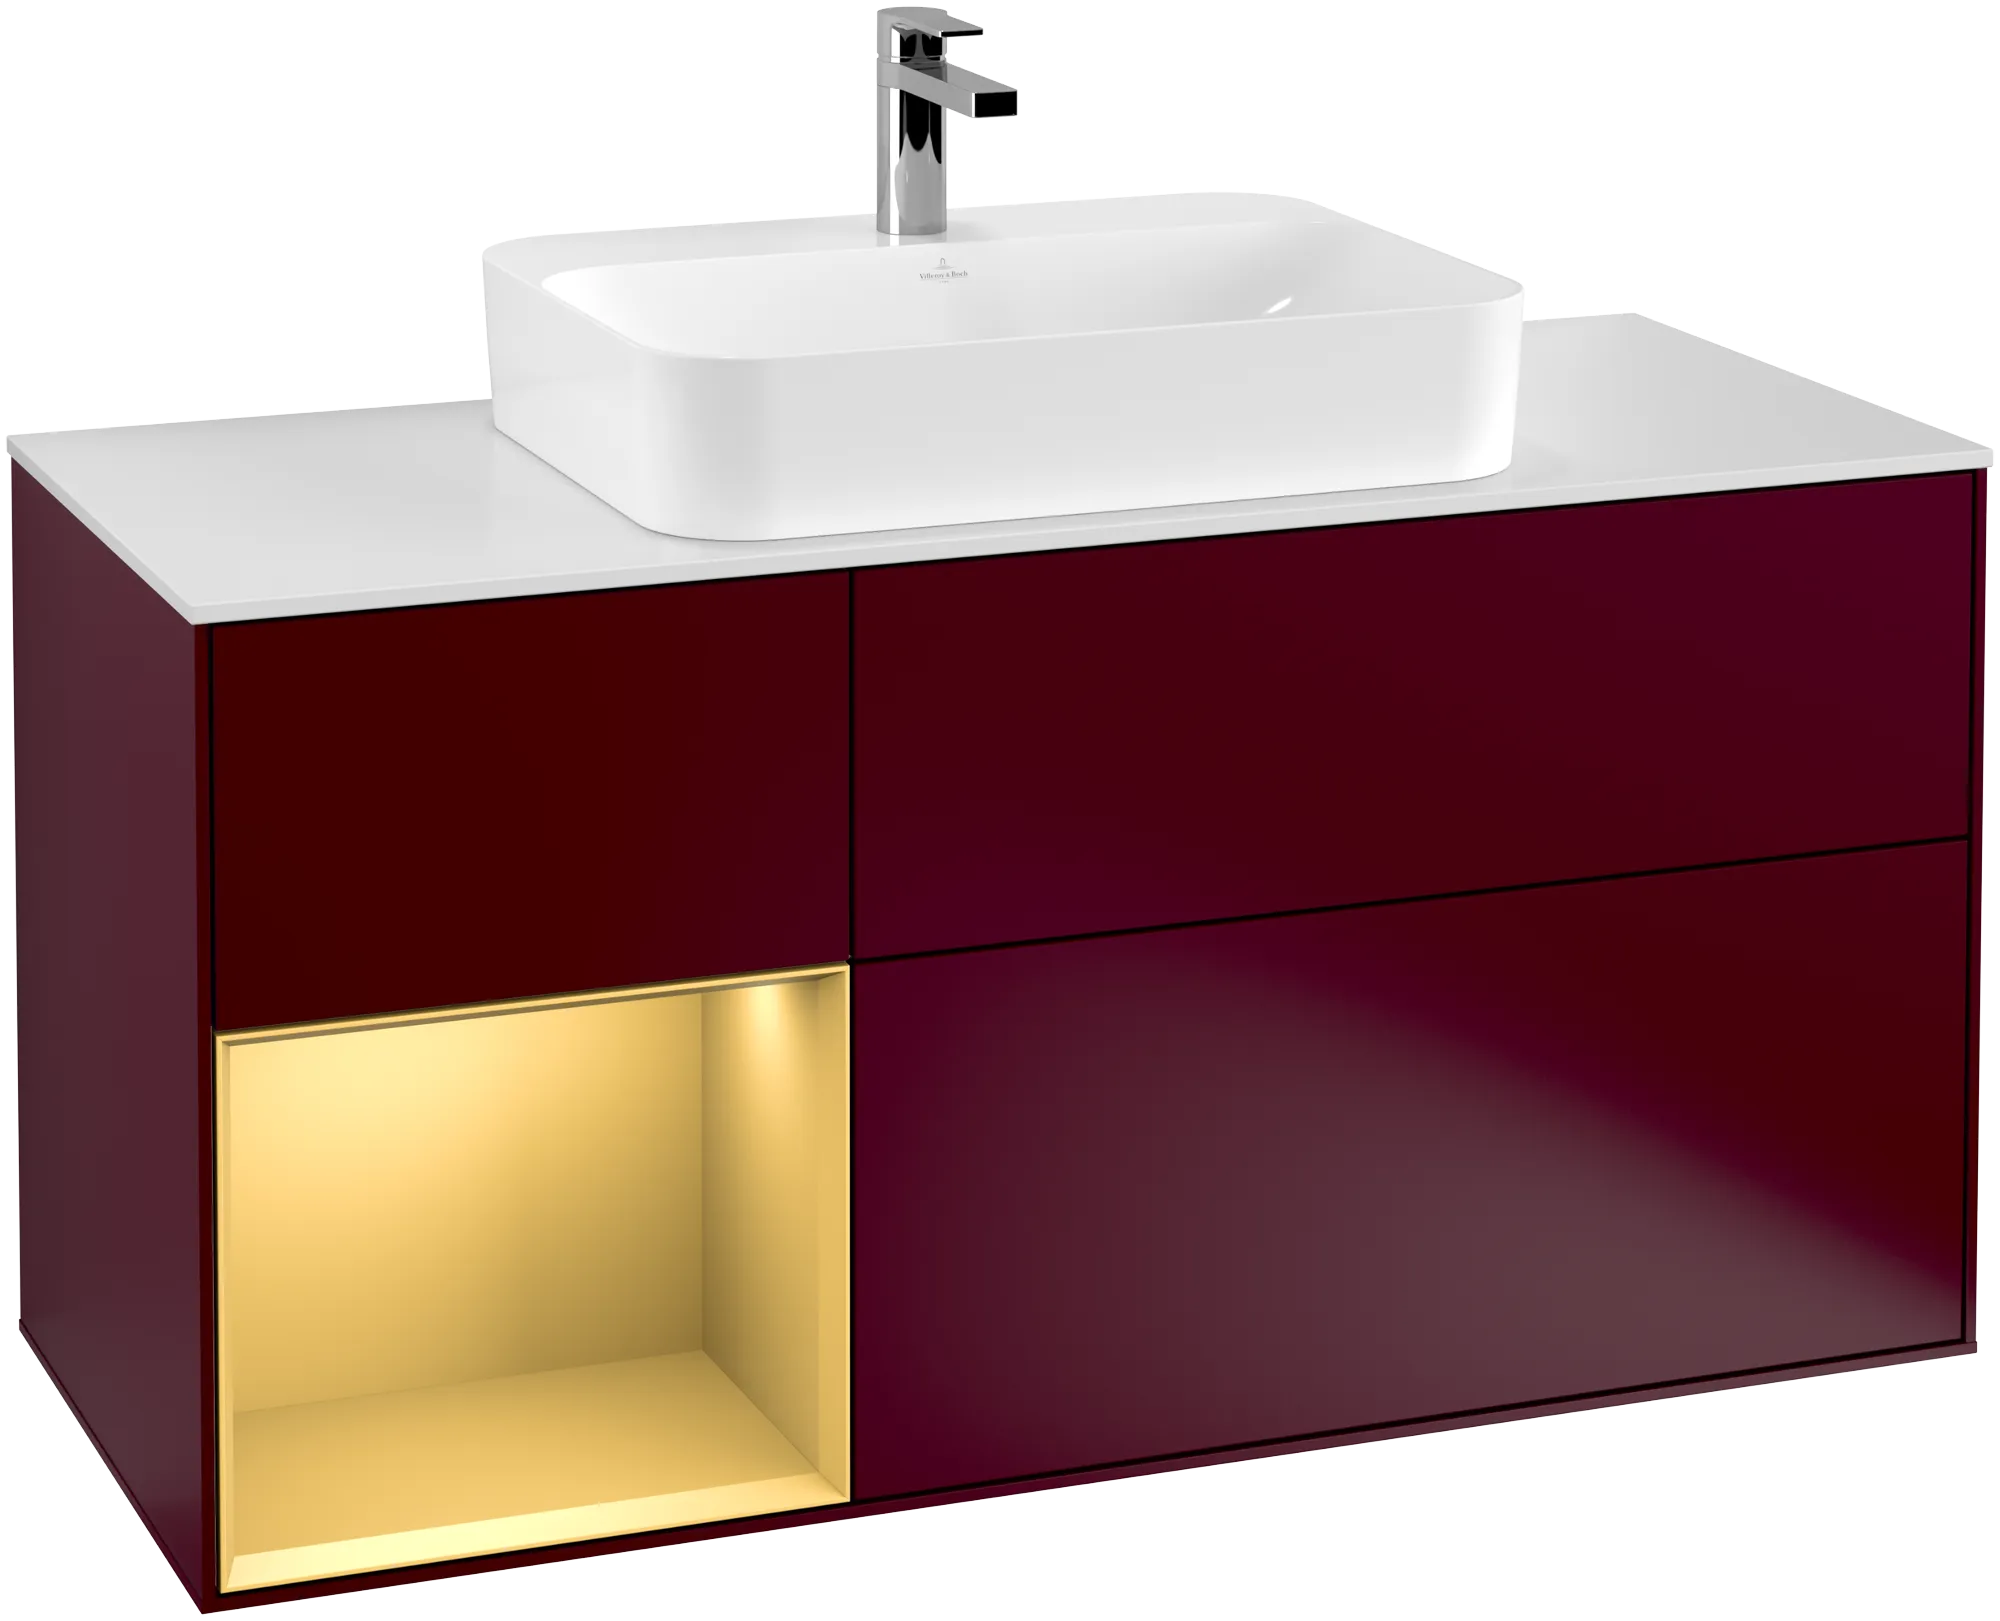 VILLEROY BOCH Finion Vanity unit, with lighting, 3 pull-out compartments, 1200 x 603 x 501 mm, Peony Matt Lacquer / Gold Matt Lacquer / Glass White Matt #G411HFHB resmi